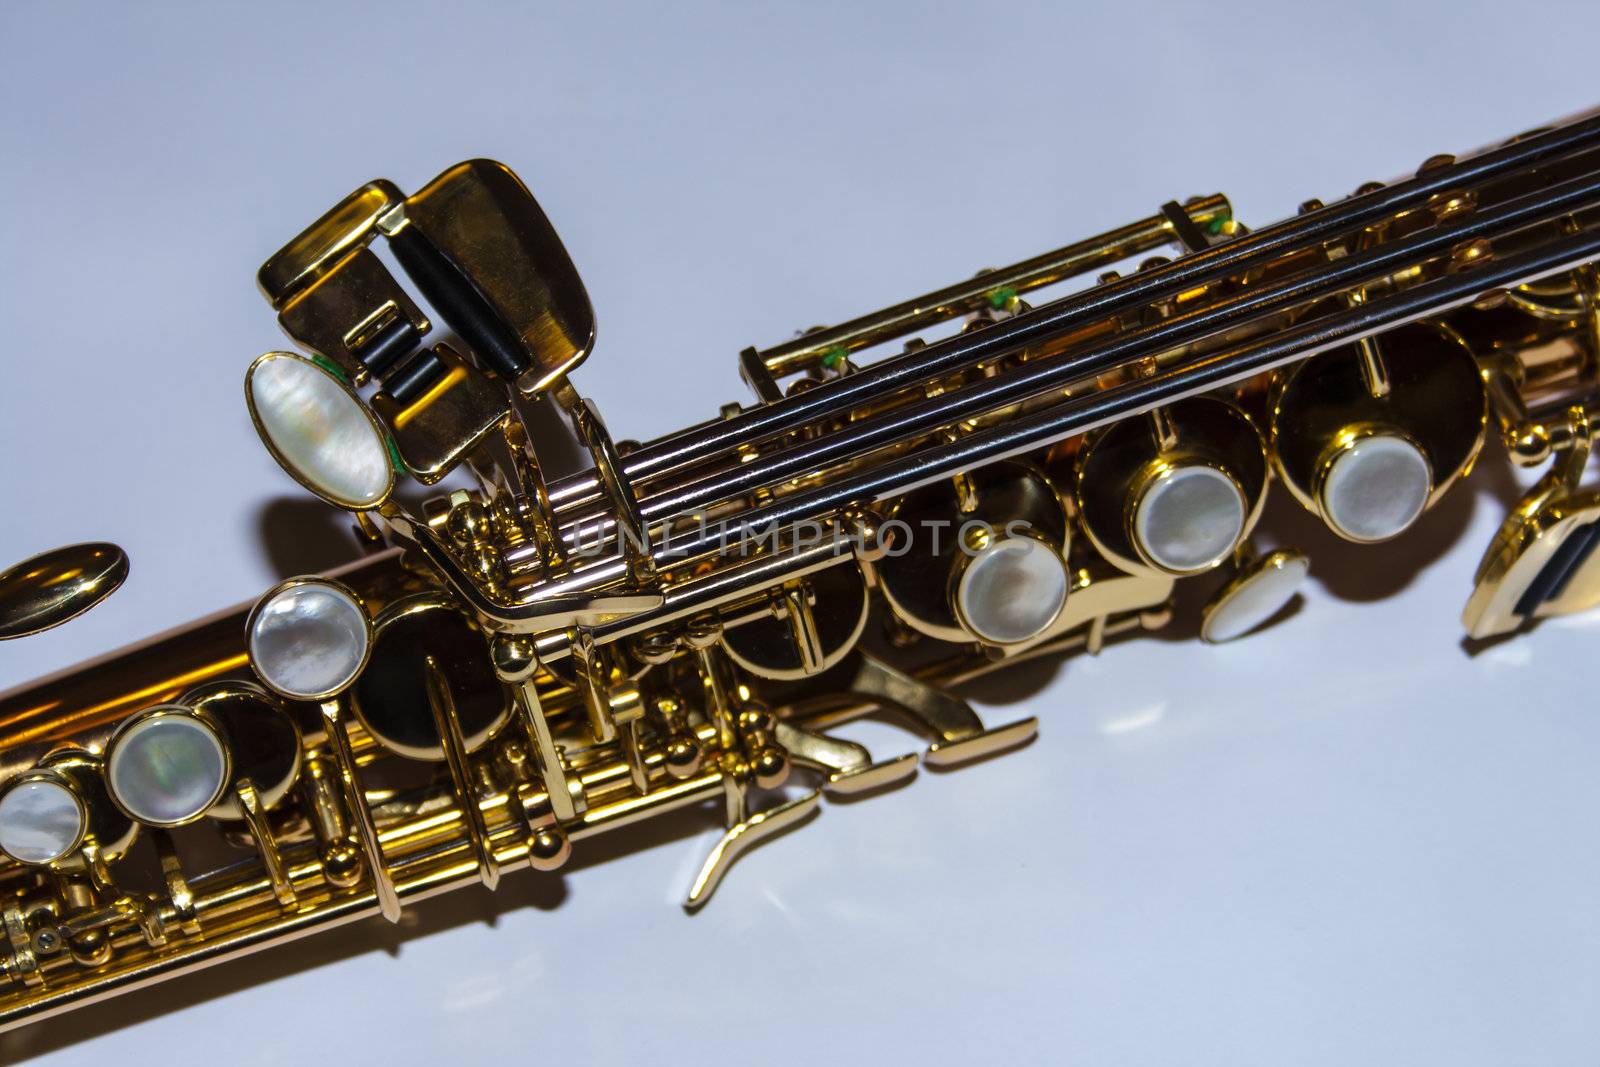 Details of the flap system of a saxophone by koep